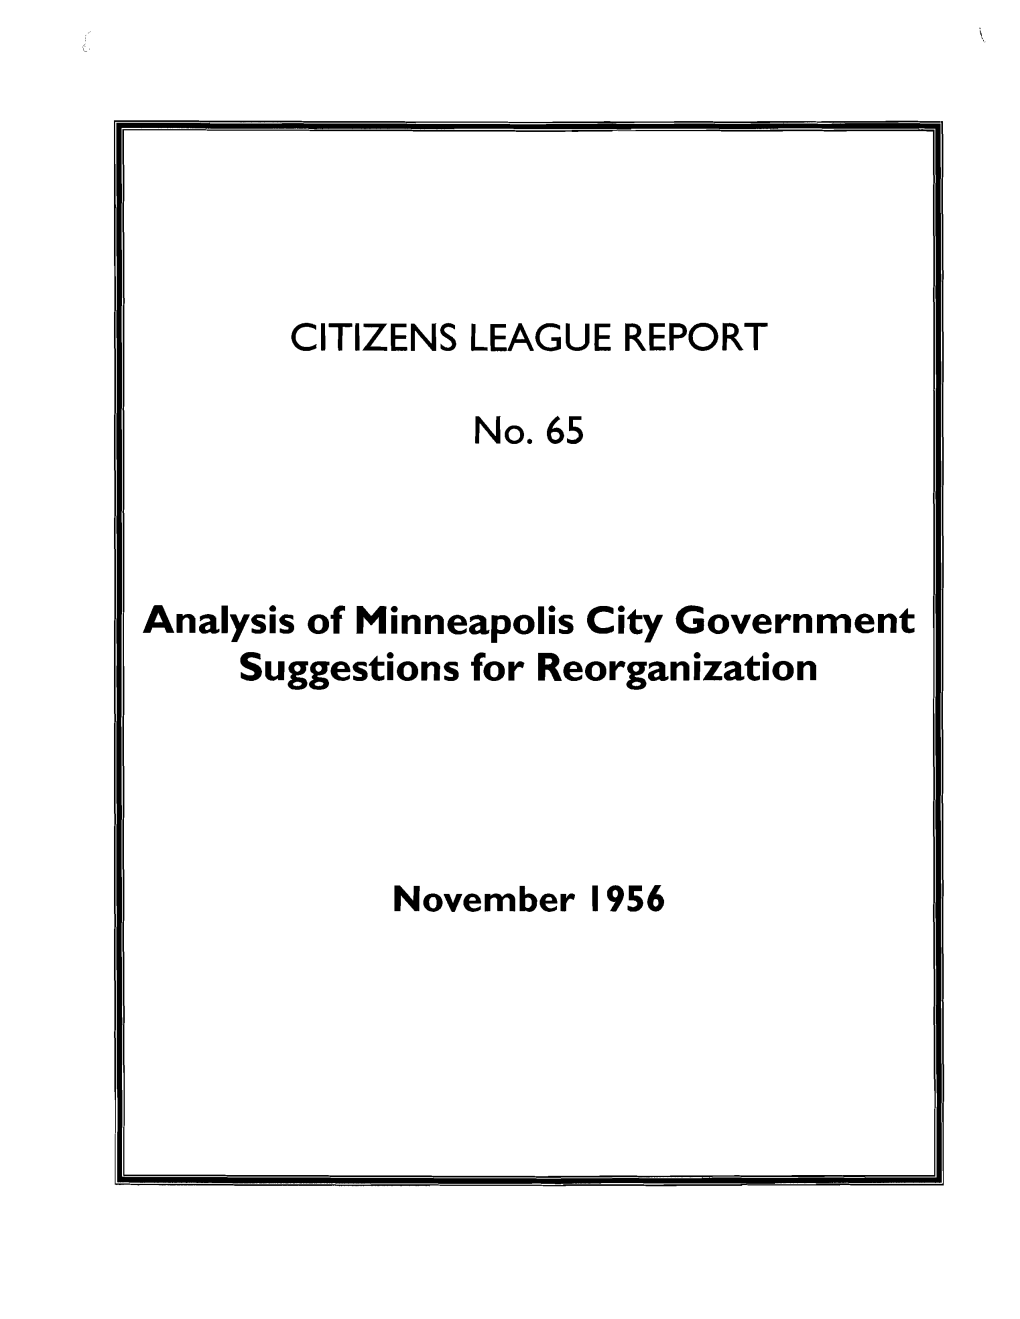 An Analysis of Minneapolis City Government with Some Suggestions